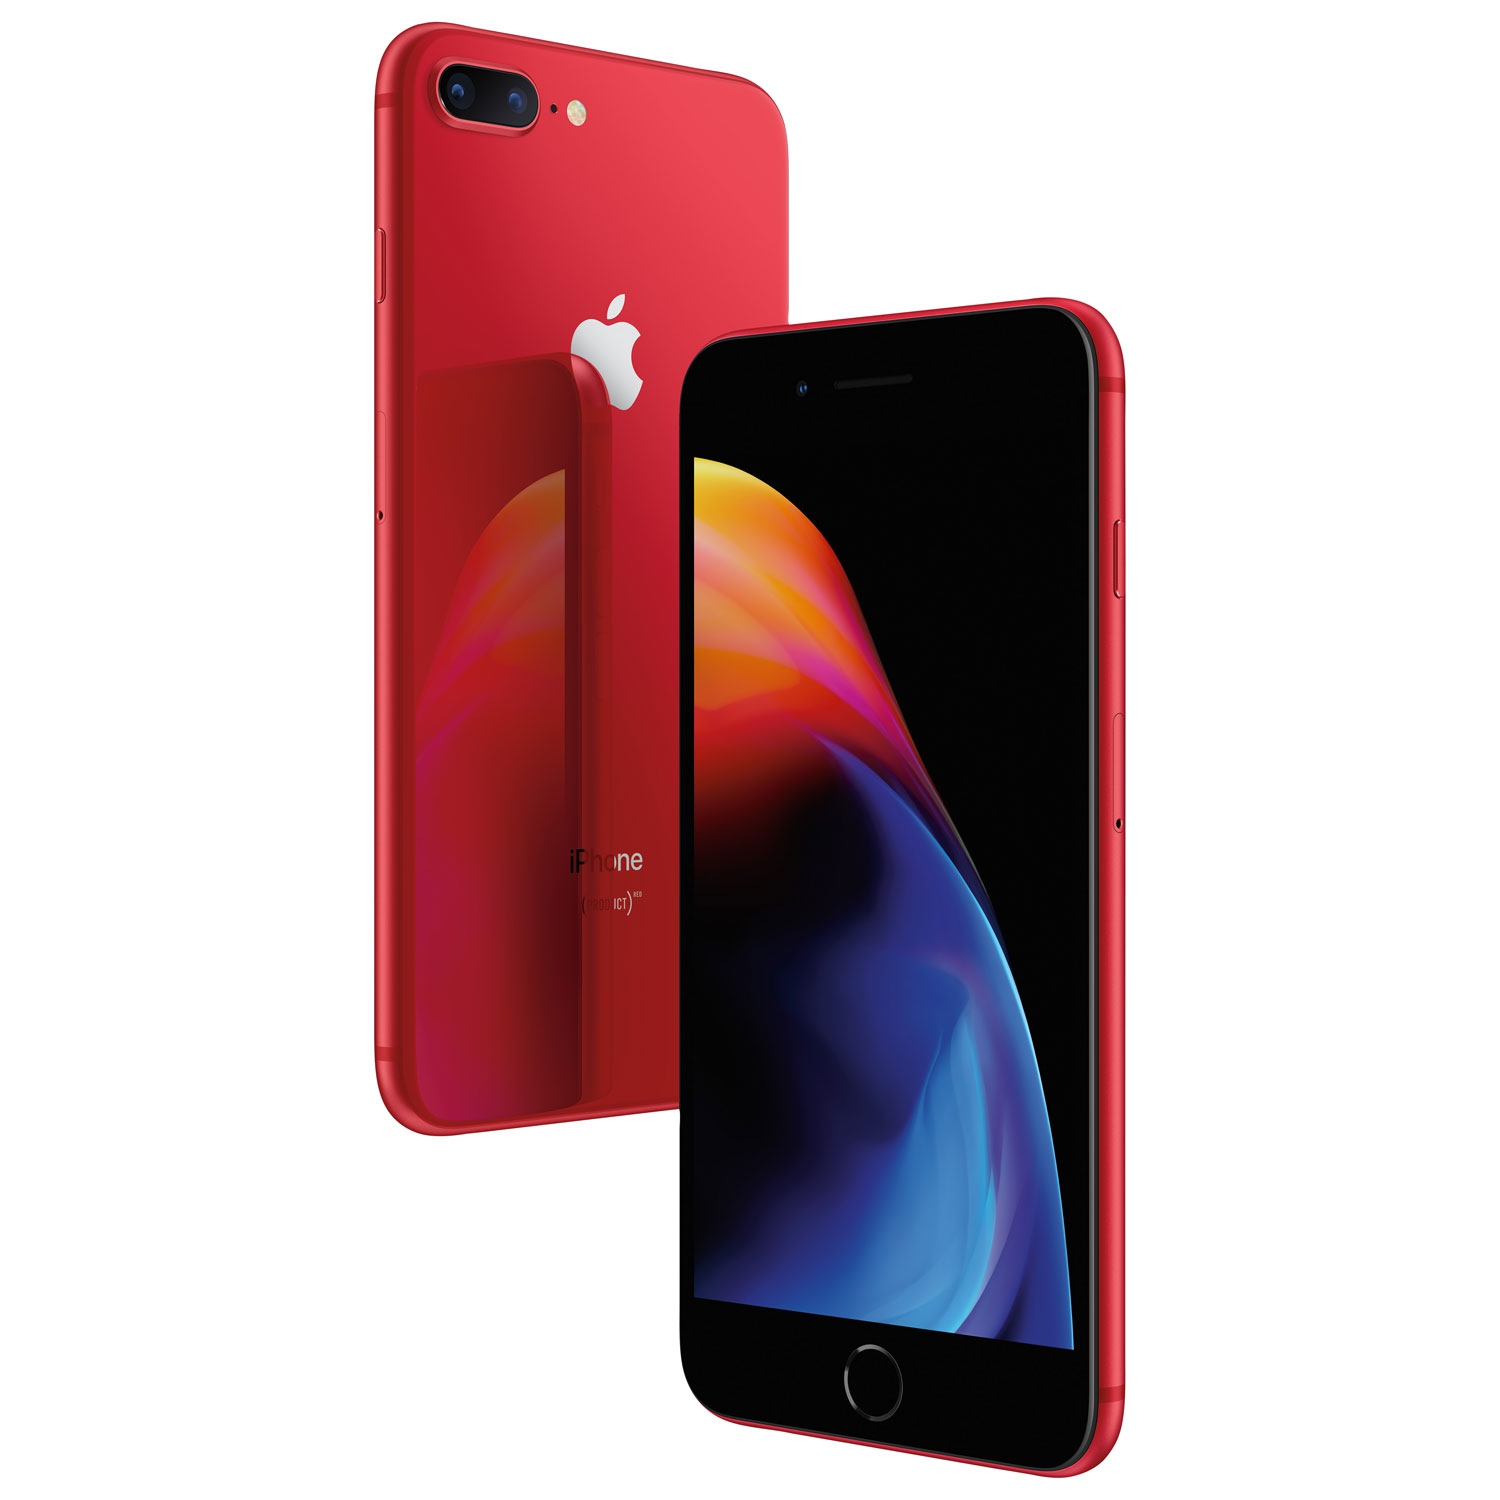 Refurbished (Excellent) - Apple iPhone 8 Plus 256GB Smartphone - (Product)RED - Unlocked - Certified Refurbished